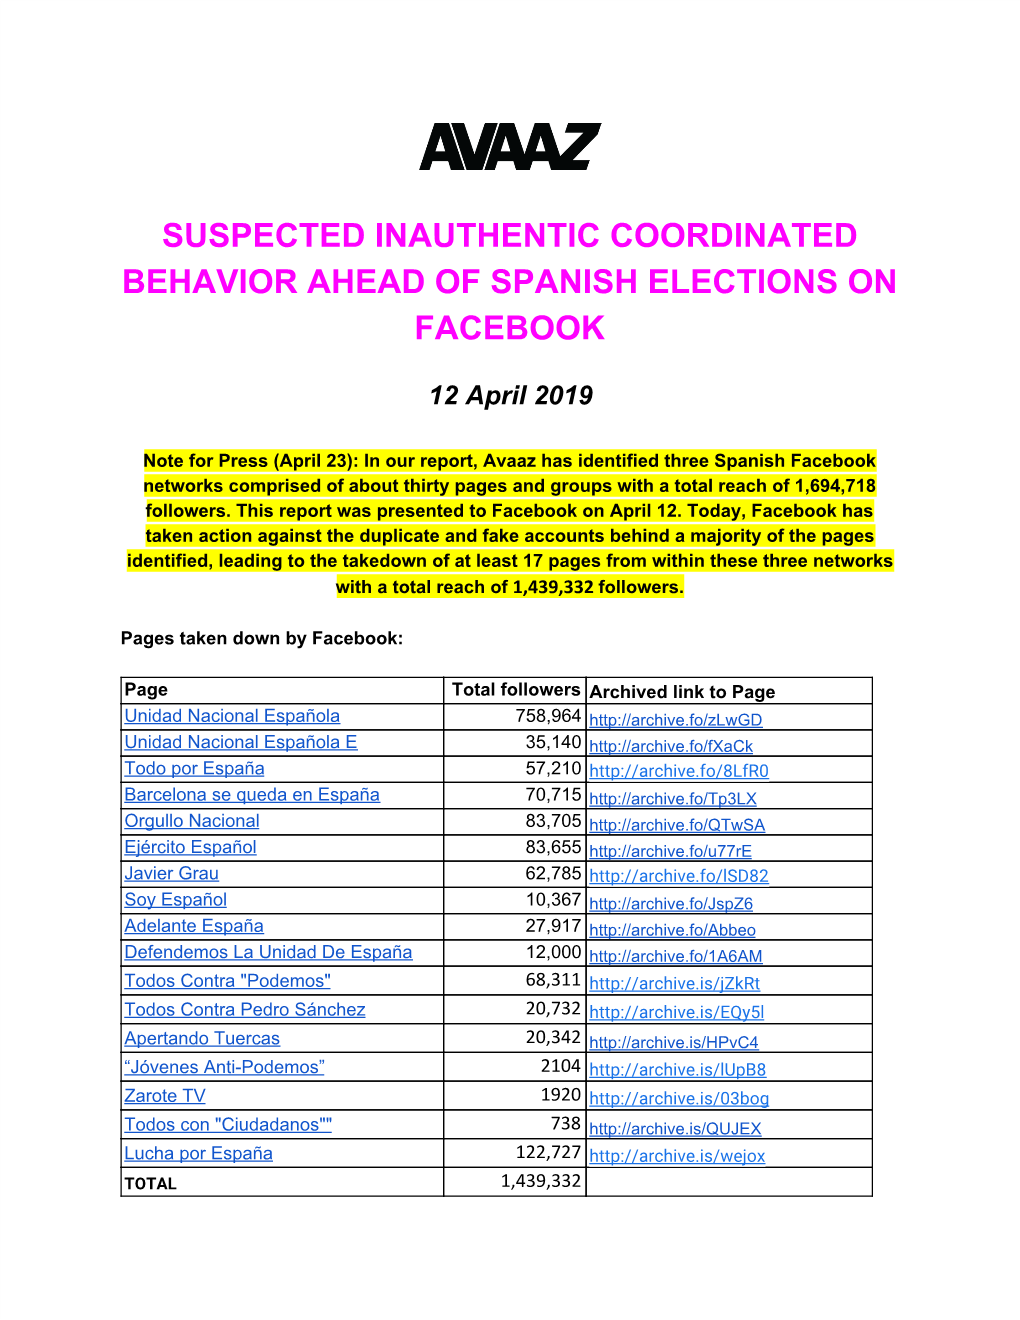 Suspected Inauthentic Coordinated Behavior Ahead of Spanish Elections on Facebook